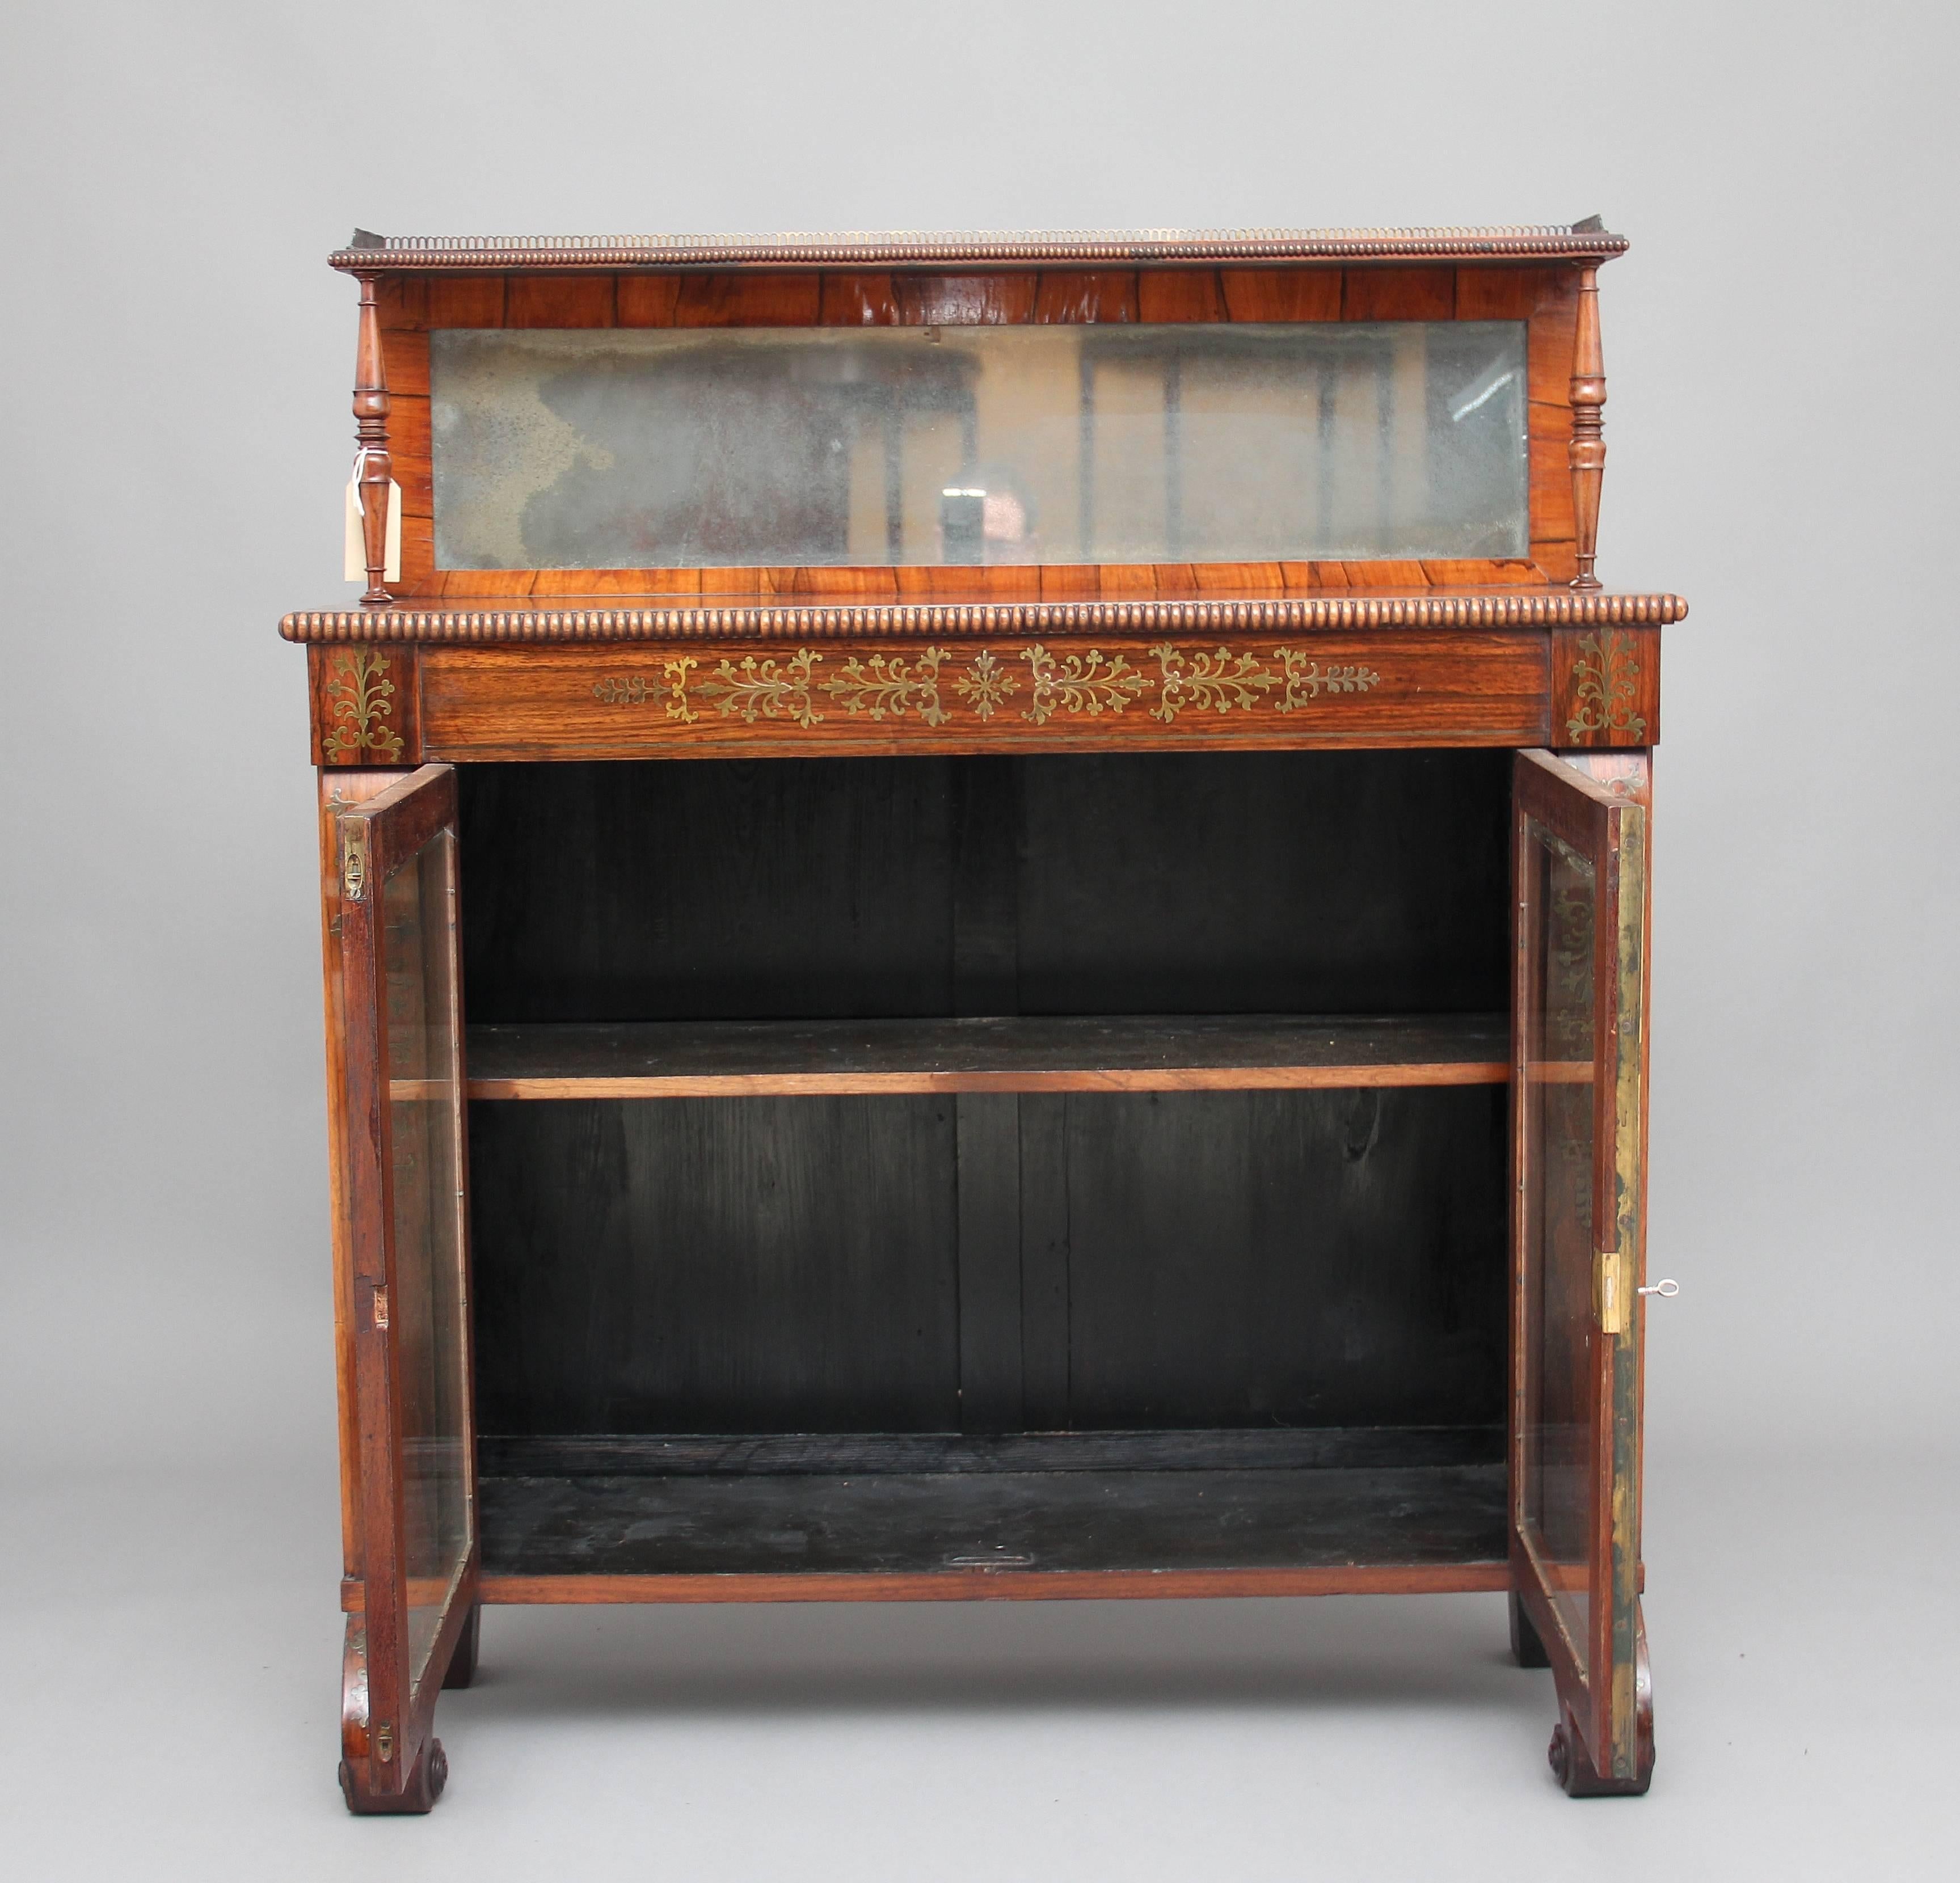 Early 19th century Regency rosewood and brass inlaid chiffonier, the cabinet having a mirror back and shelf decorated with beading and a brass gallery running along the front and sides, supported by elegant turned columns, the top of the actual